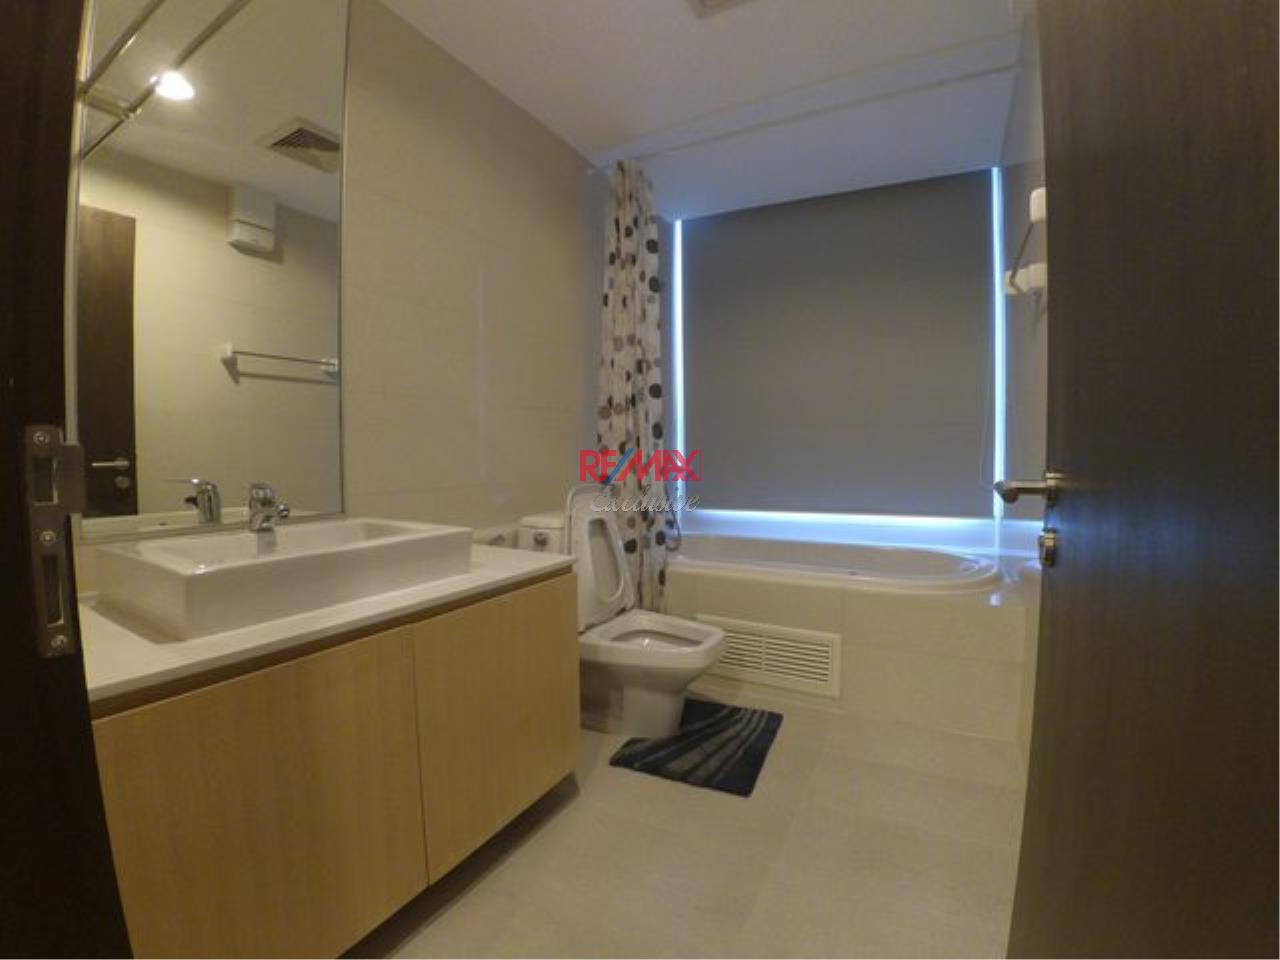 RE/MAX Exclusive Agency's THE ALCOVE, Thonglor 10, 44 Sqm., 1 Bedroom, Fully-Furnished, Fully Equipped Kitchen For RENT !!!! 8